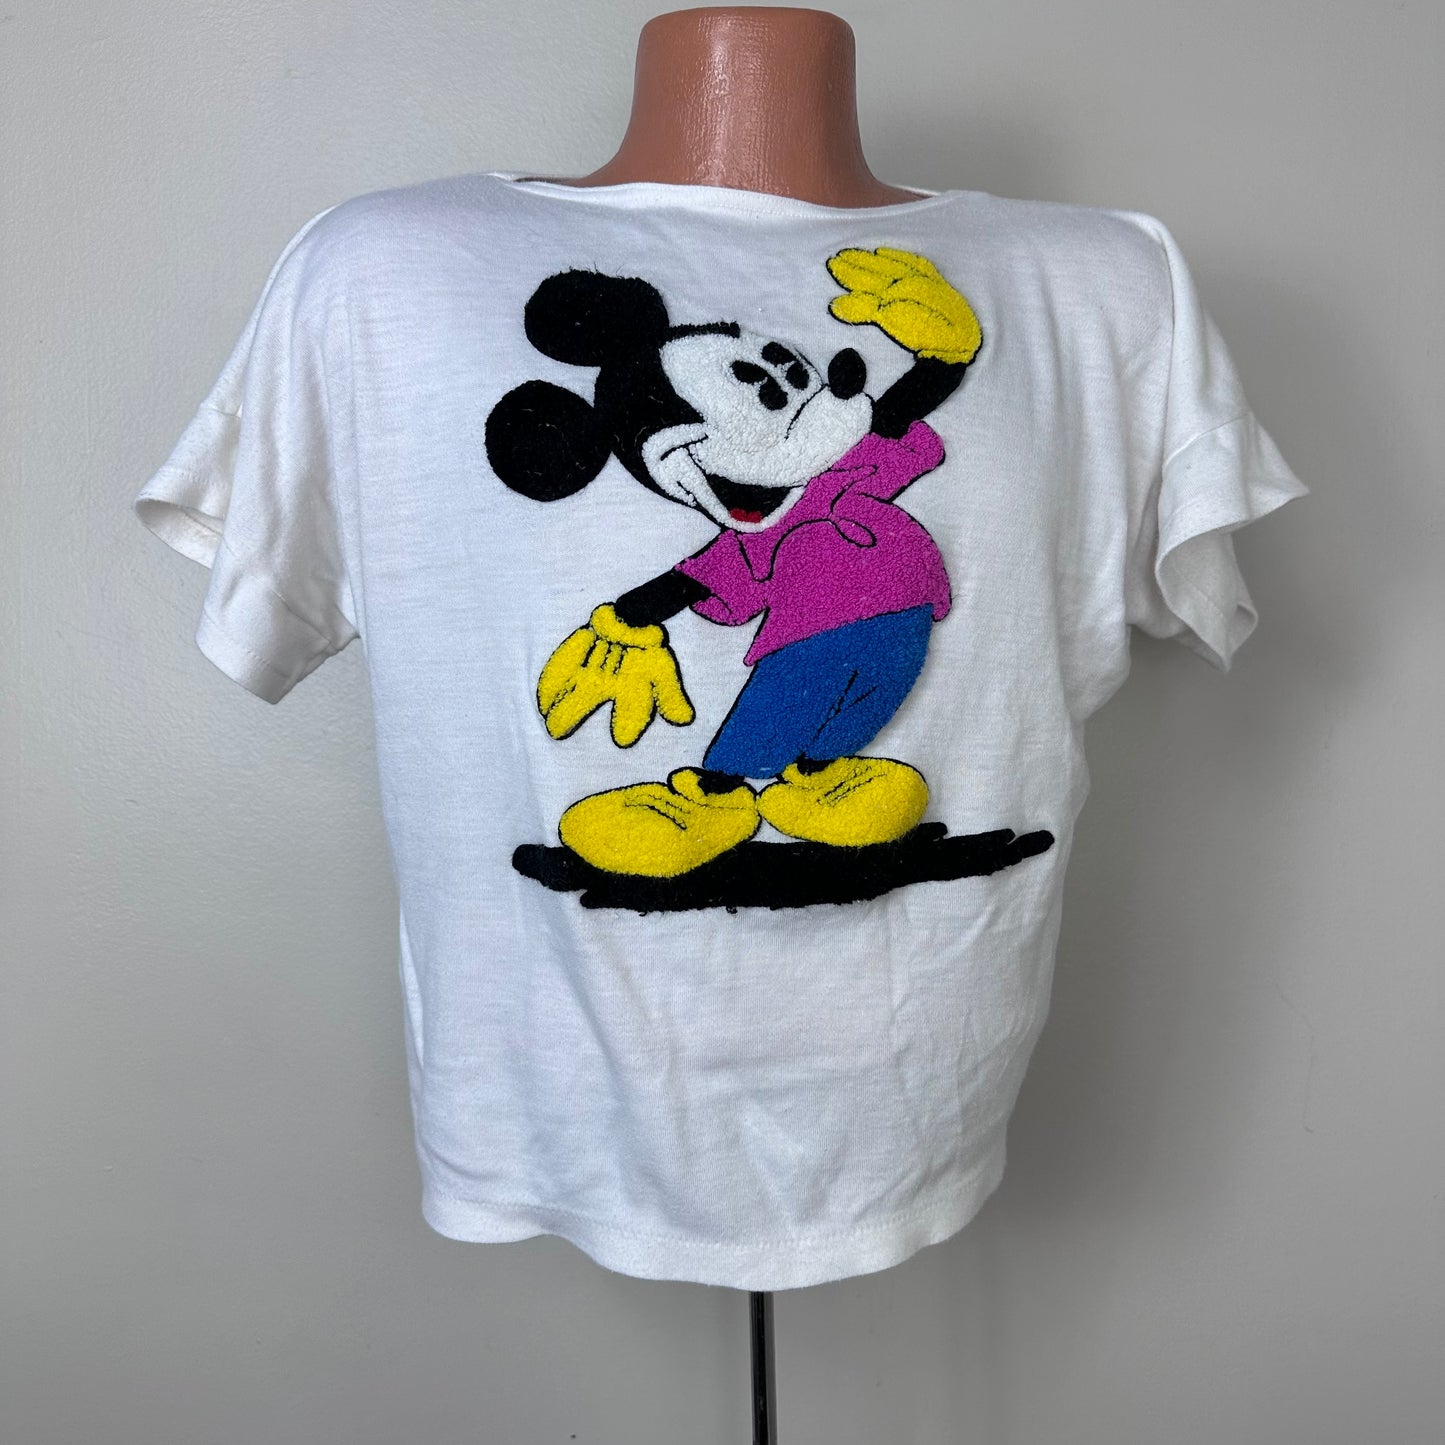 1980s Mickey Mouse T-Shirt, Sunday Comics Size Medium, Chenille Embroidery